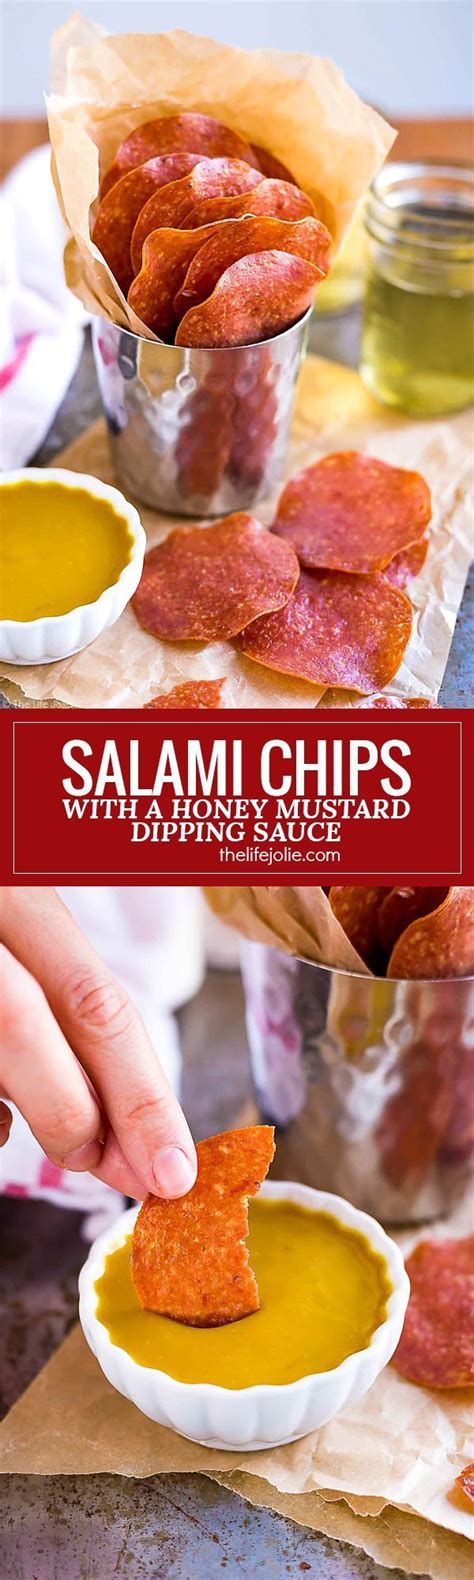 At a party, you want to make it as easy as possible for your guests to mingle and move around. These Salami Chips are a seriously addictive appetizer ...